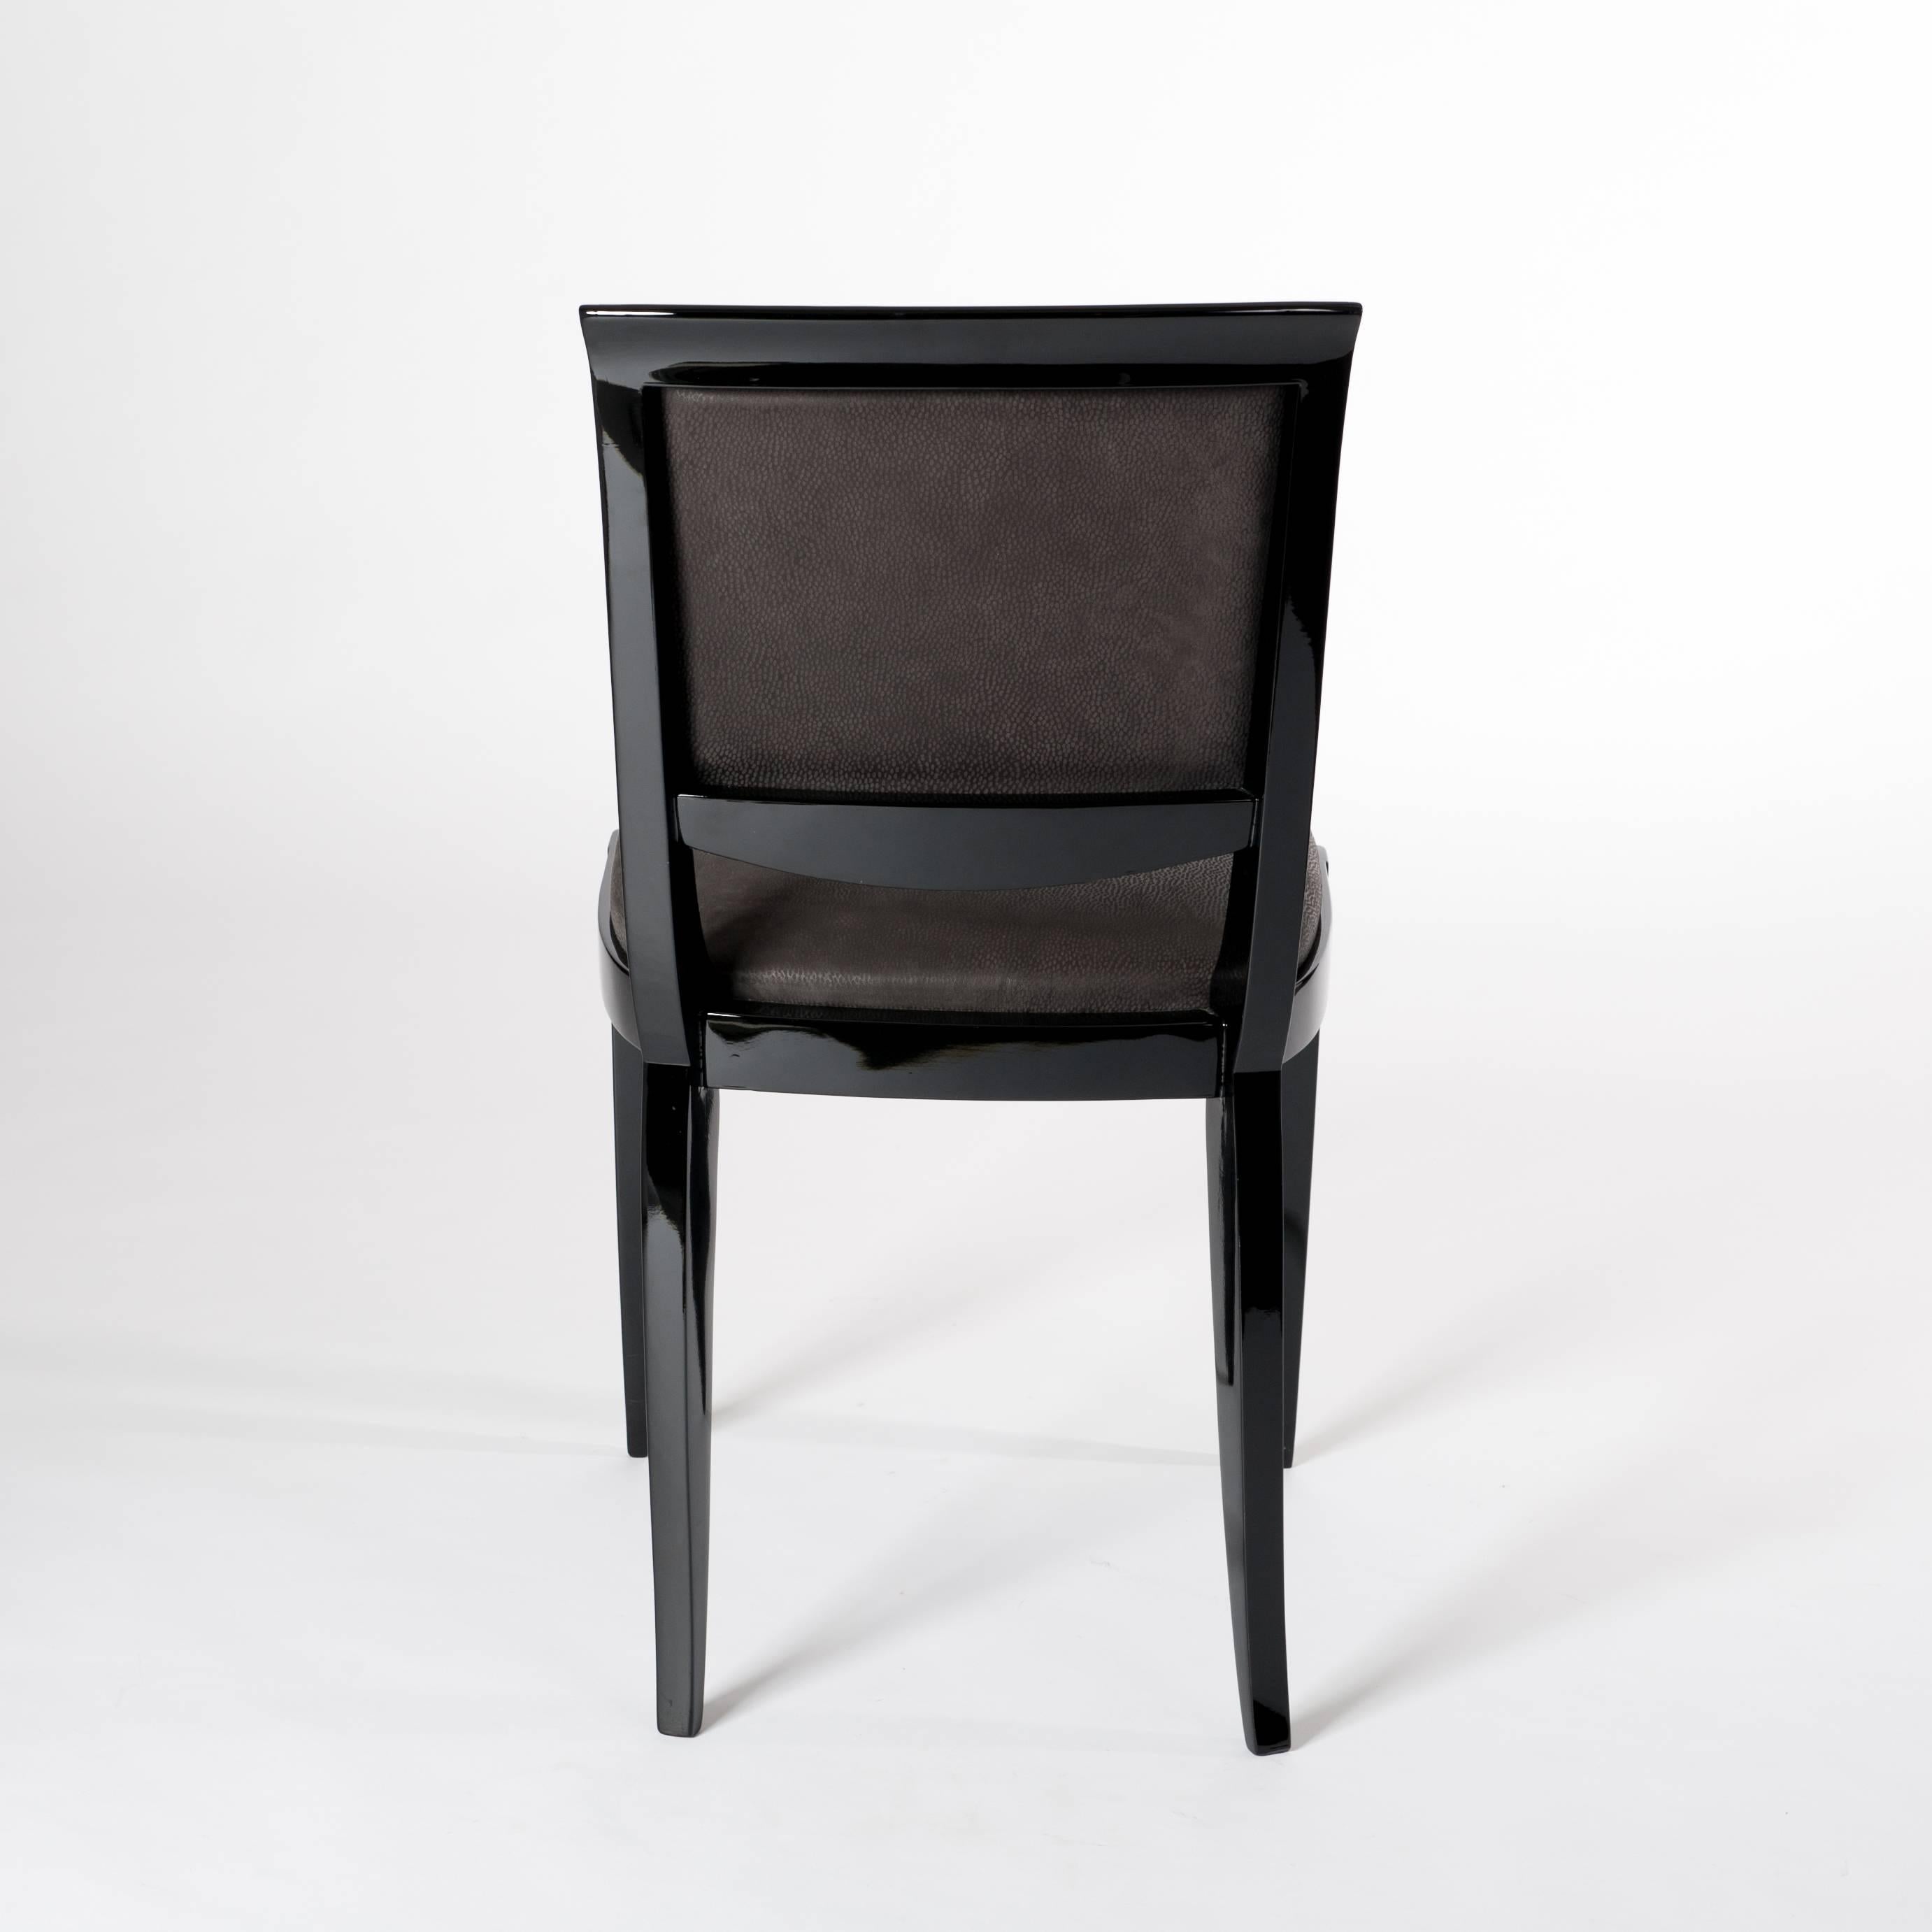 Six Black French Art Deco Dining Room Chairs Re-Lacquered and Re-Upholstered 4